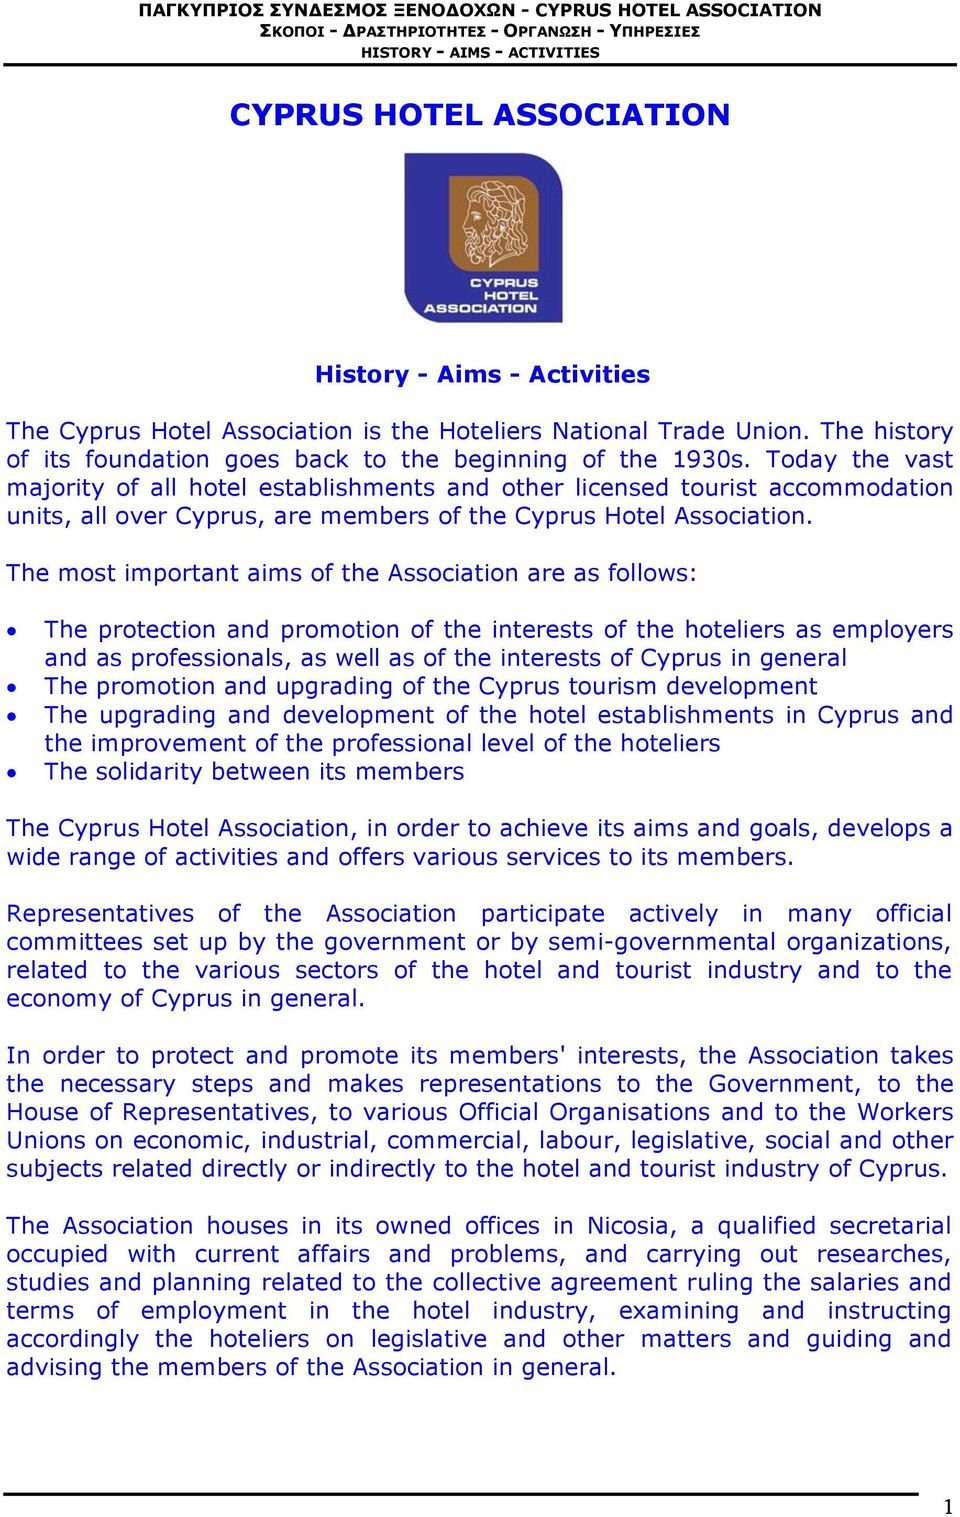 The most important aims of the Association are as follows: The protection and promotion of the interests of the hoteliers as employers and as professionals, as well as of the interests of Cyprus in